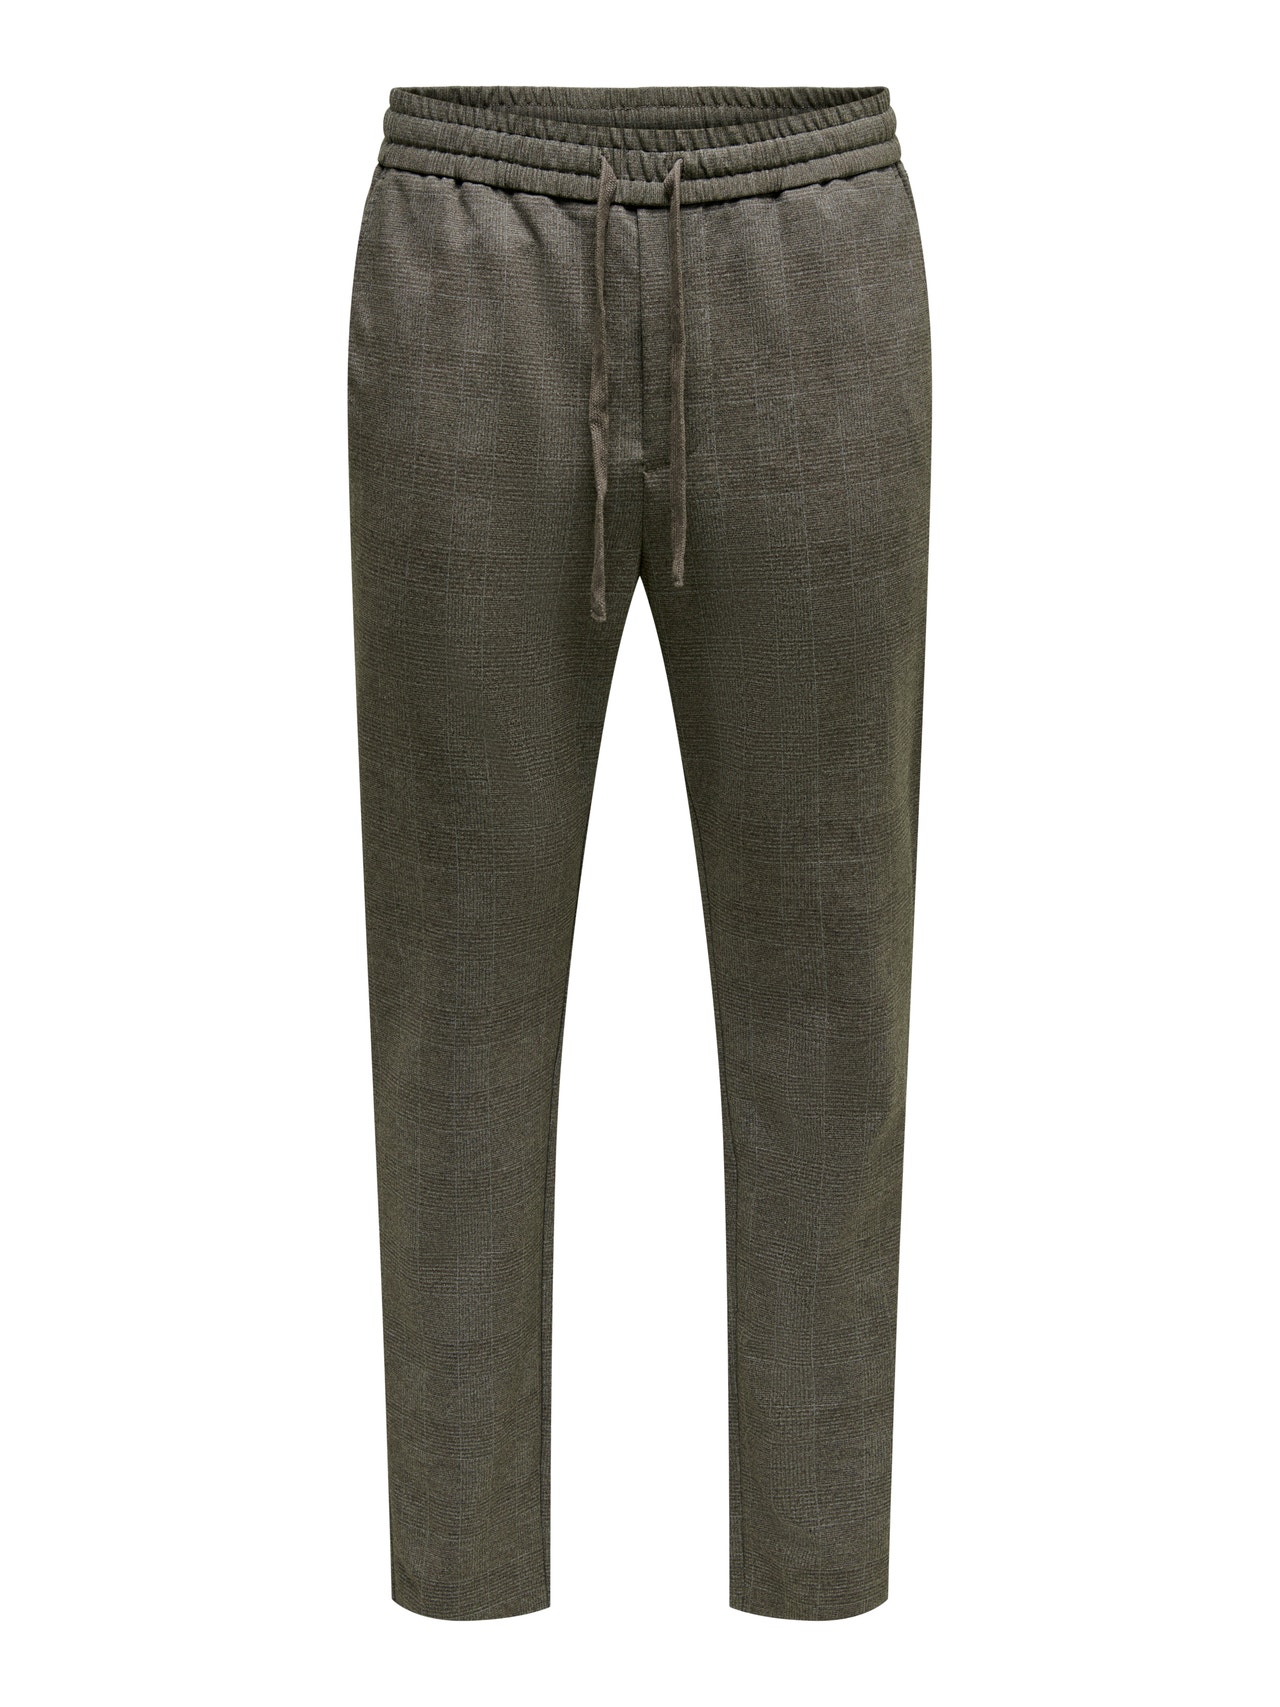 ONLY & SONS ONSLINUS TAP CHECK 3493 PANT -Caribou - 22023493